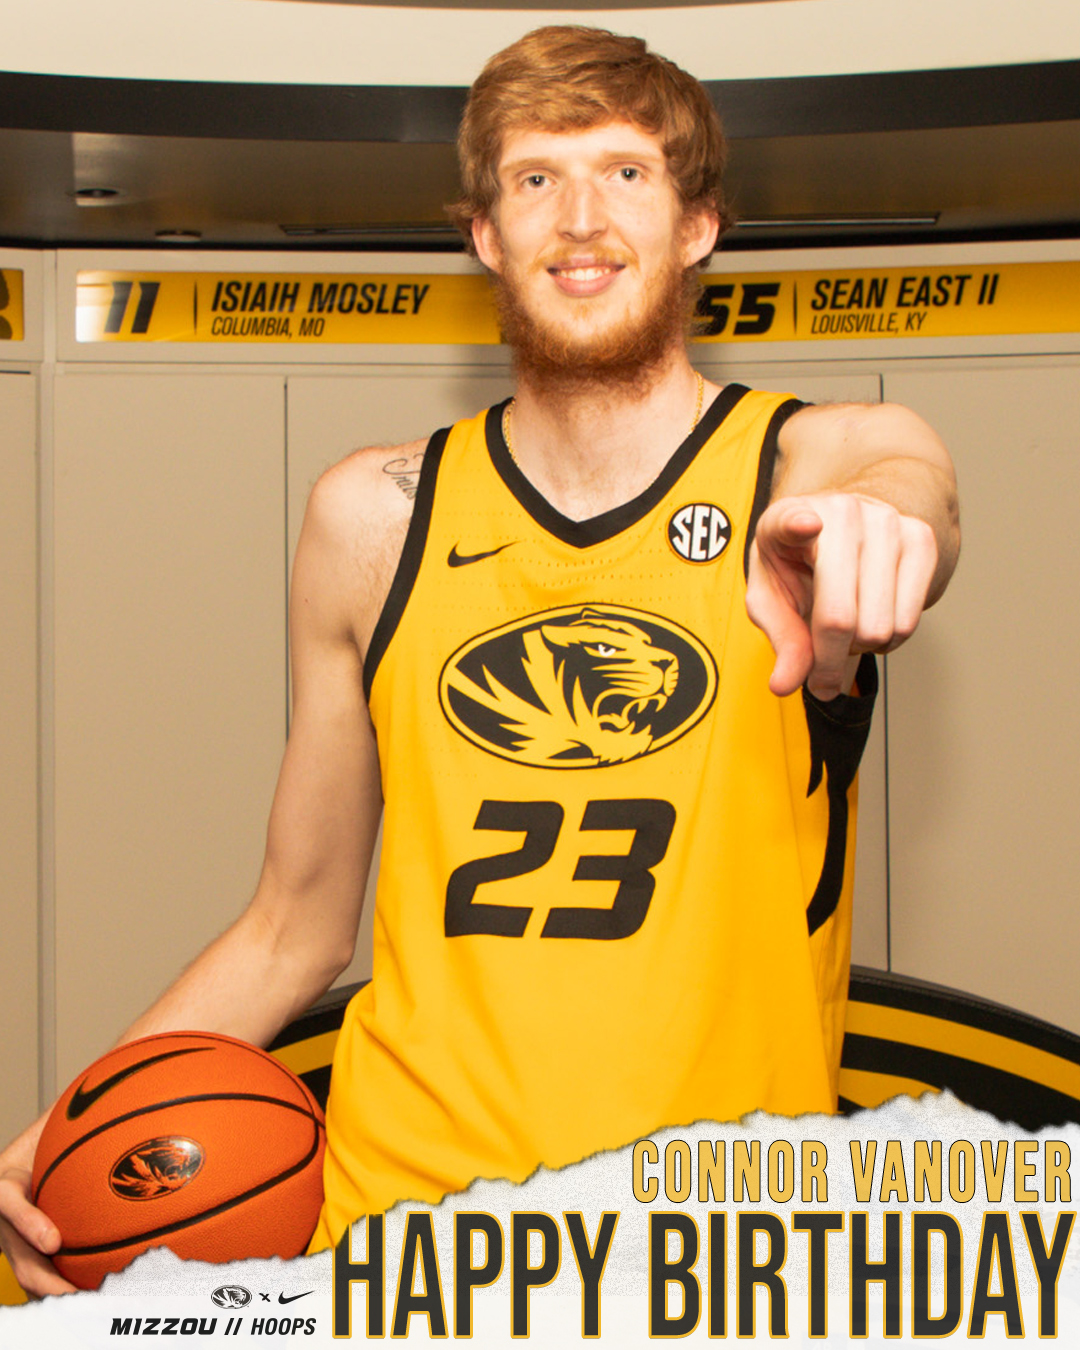 Mizzou Hypeee on Twitter "RT MizzouHoops Your first glimpse at the